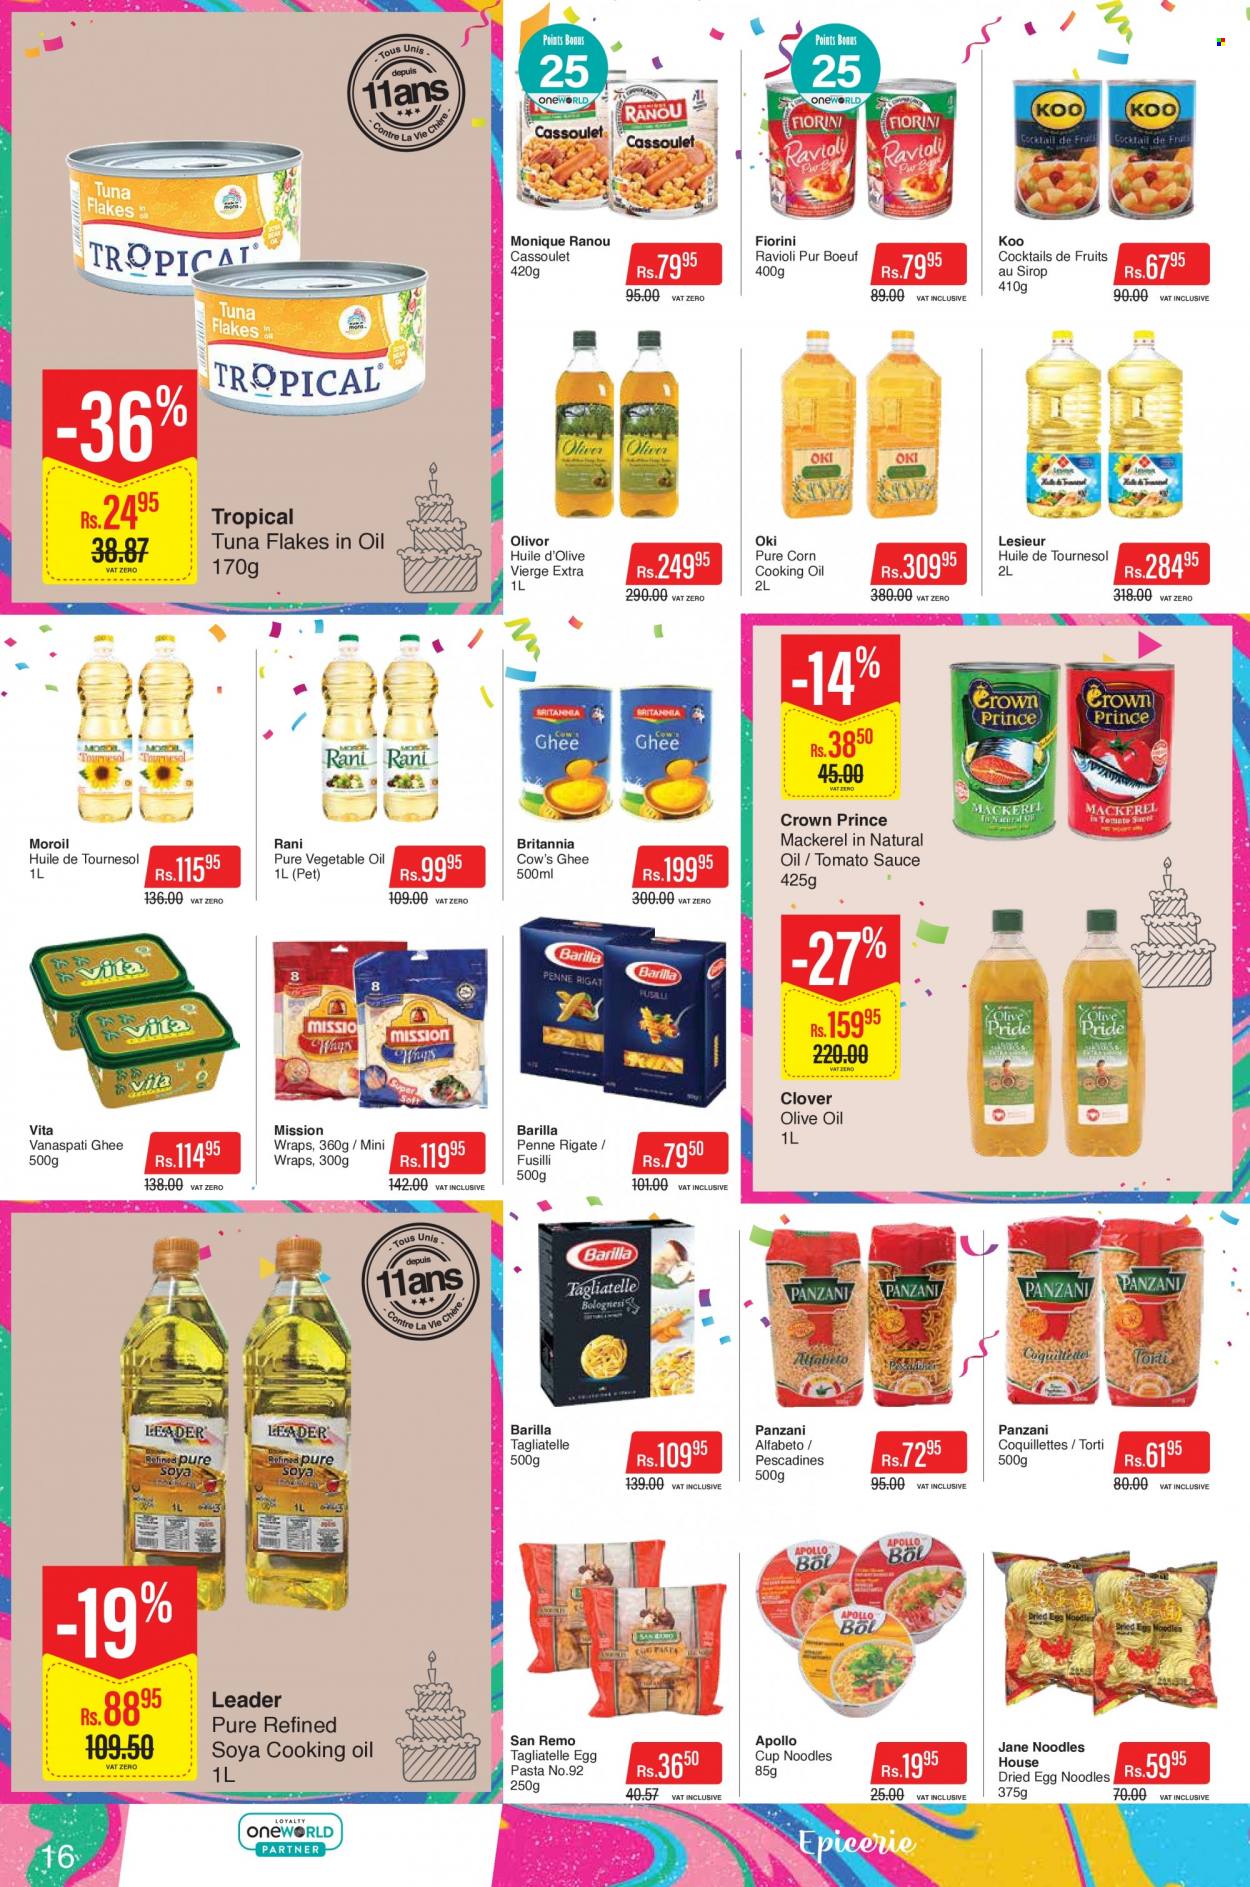 Intermart Catalogue - 23.09.2022 - 19.10.2022 - Sales products - wraps, corn, mackerel, tuna, ravioli, pasta, sauce, noodles cup, noodles, Clover, ghee, tomato sauce, Koo, egg noodles, penne, vegetable oil, olive oil, cooking oil, Barilla. Page 16.